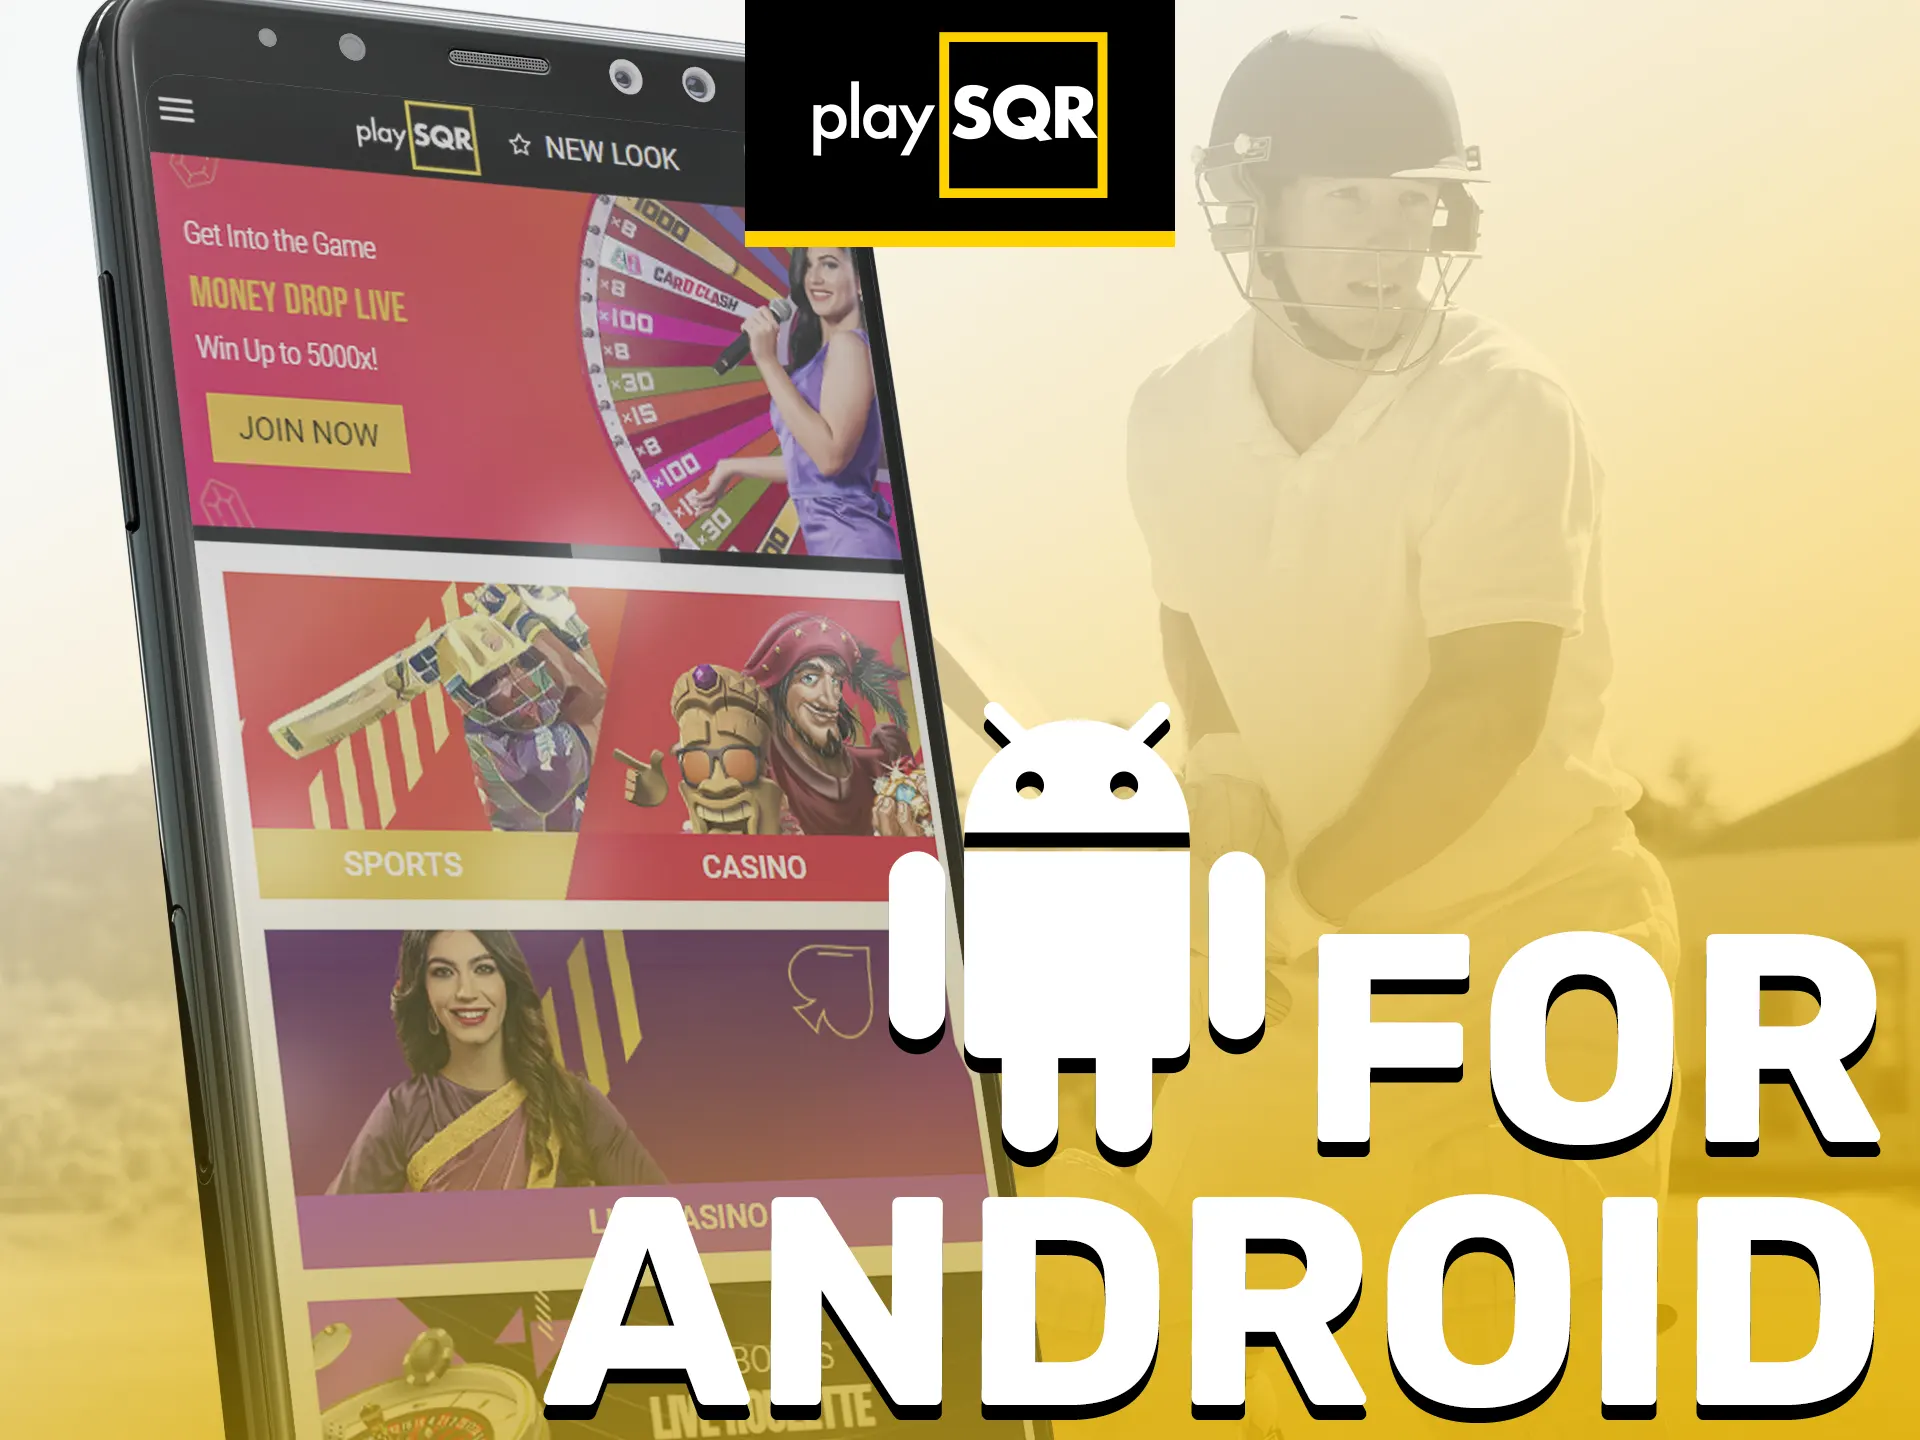 You can download the Android mobile app from the official PlaySQR website.